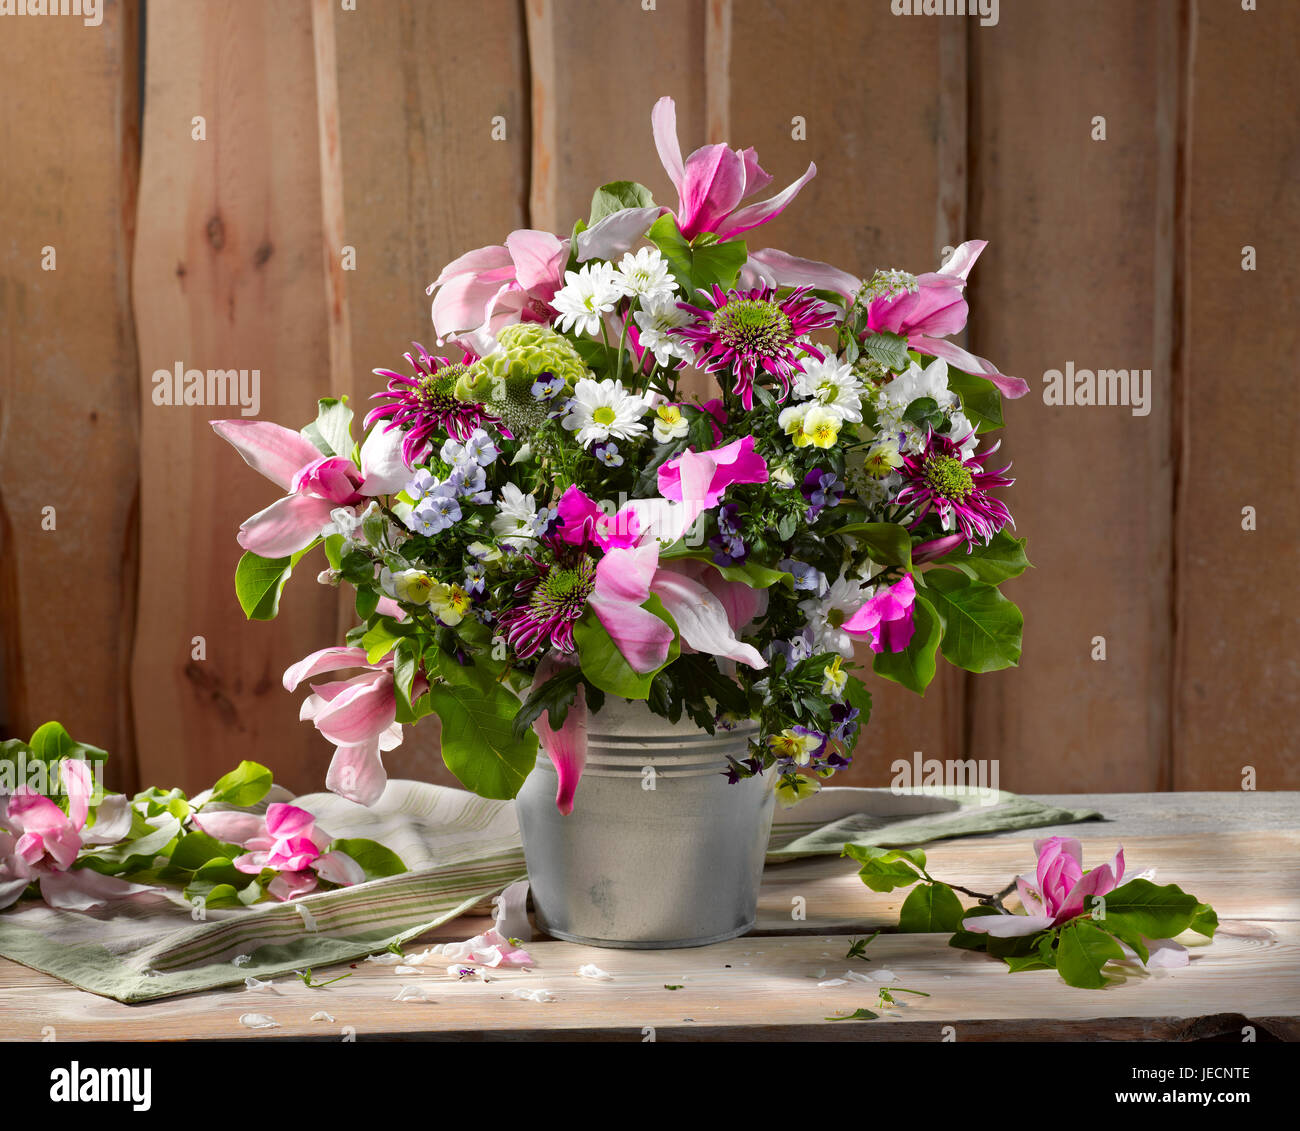 Bouquet of flowers with magnolias. Stock Photo